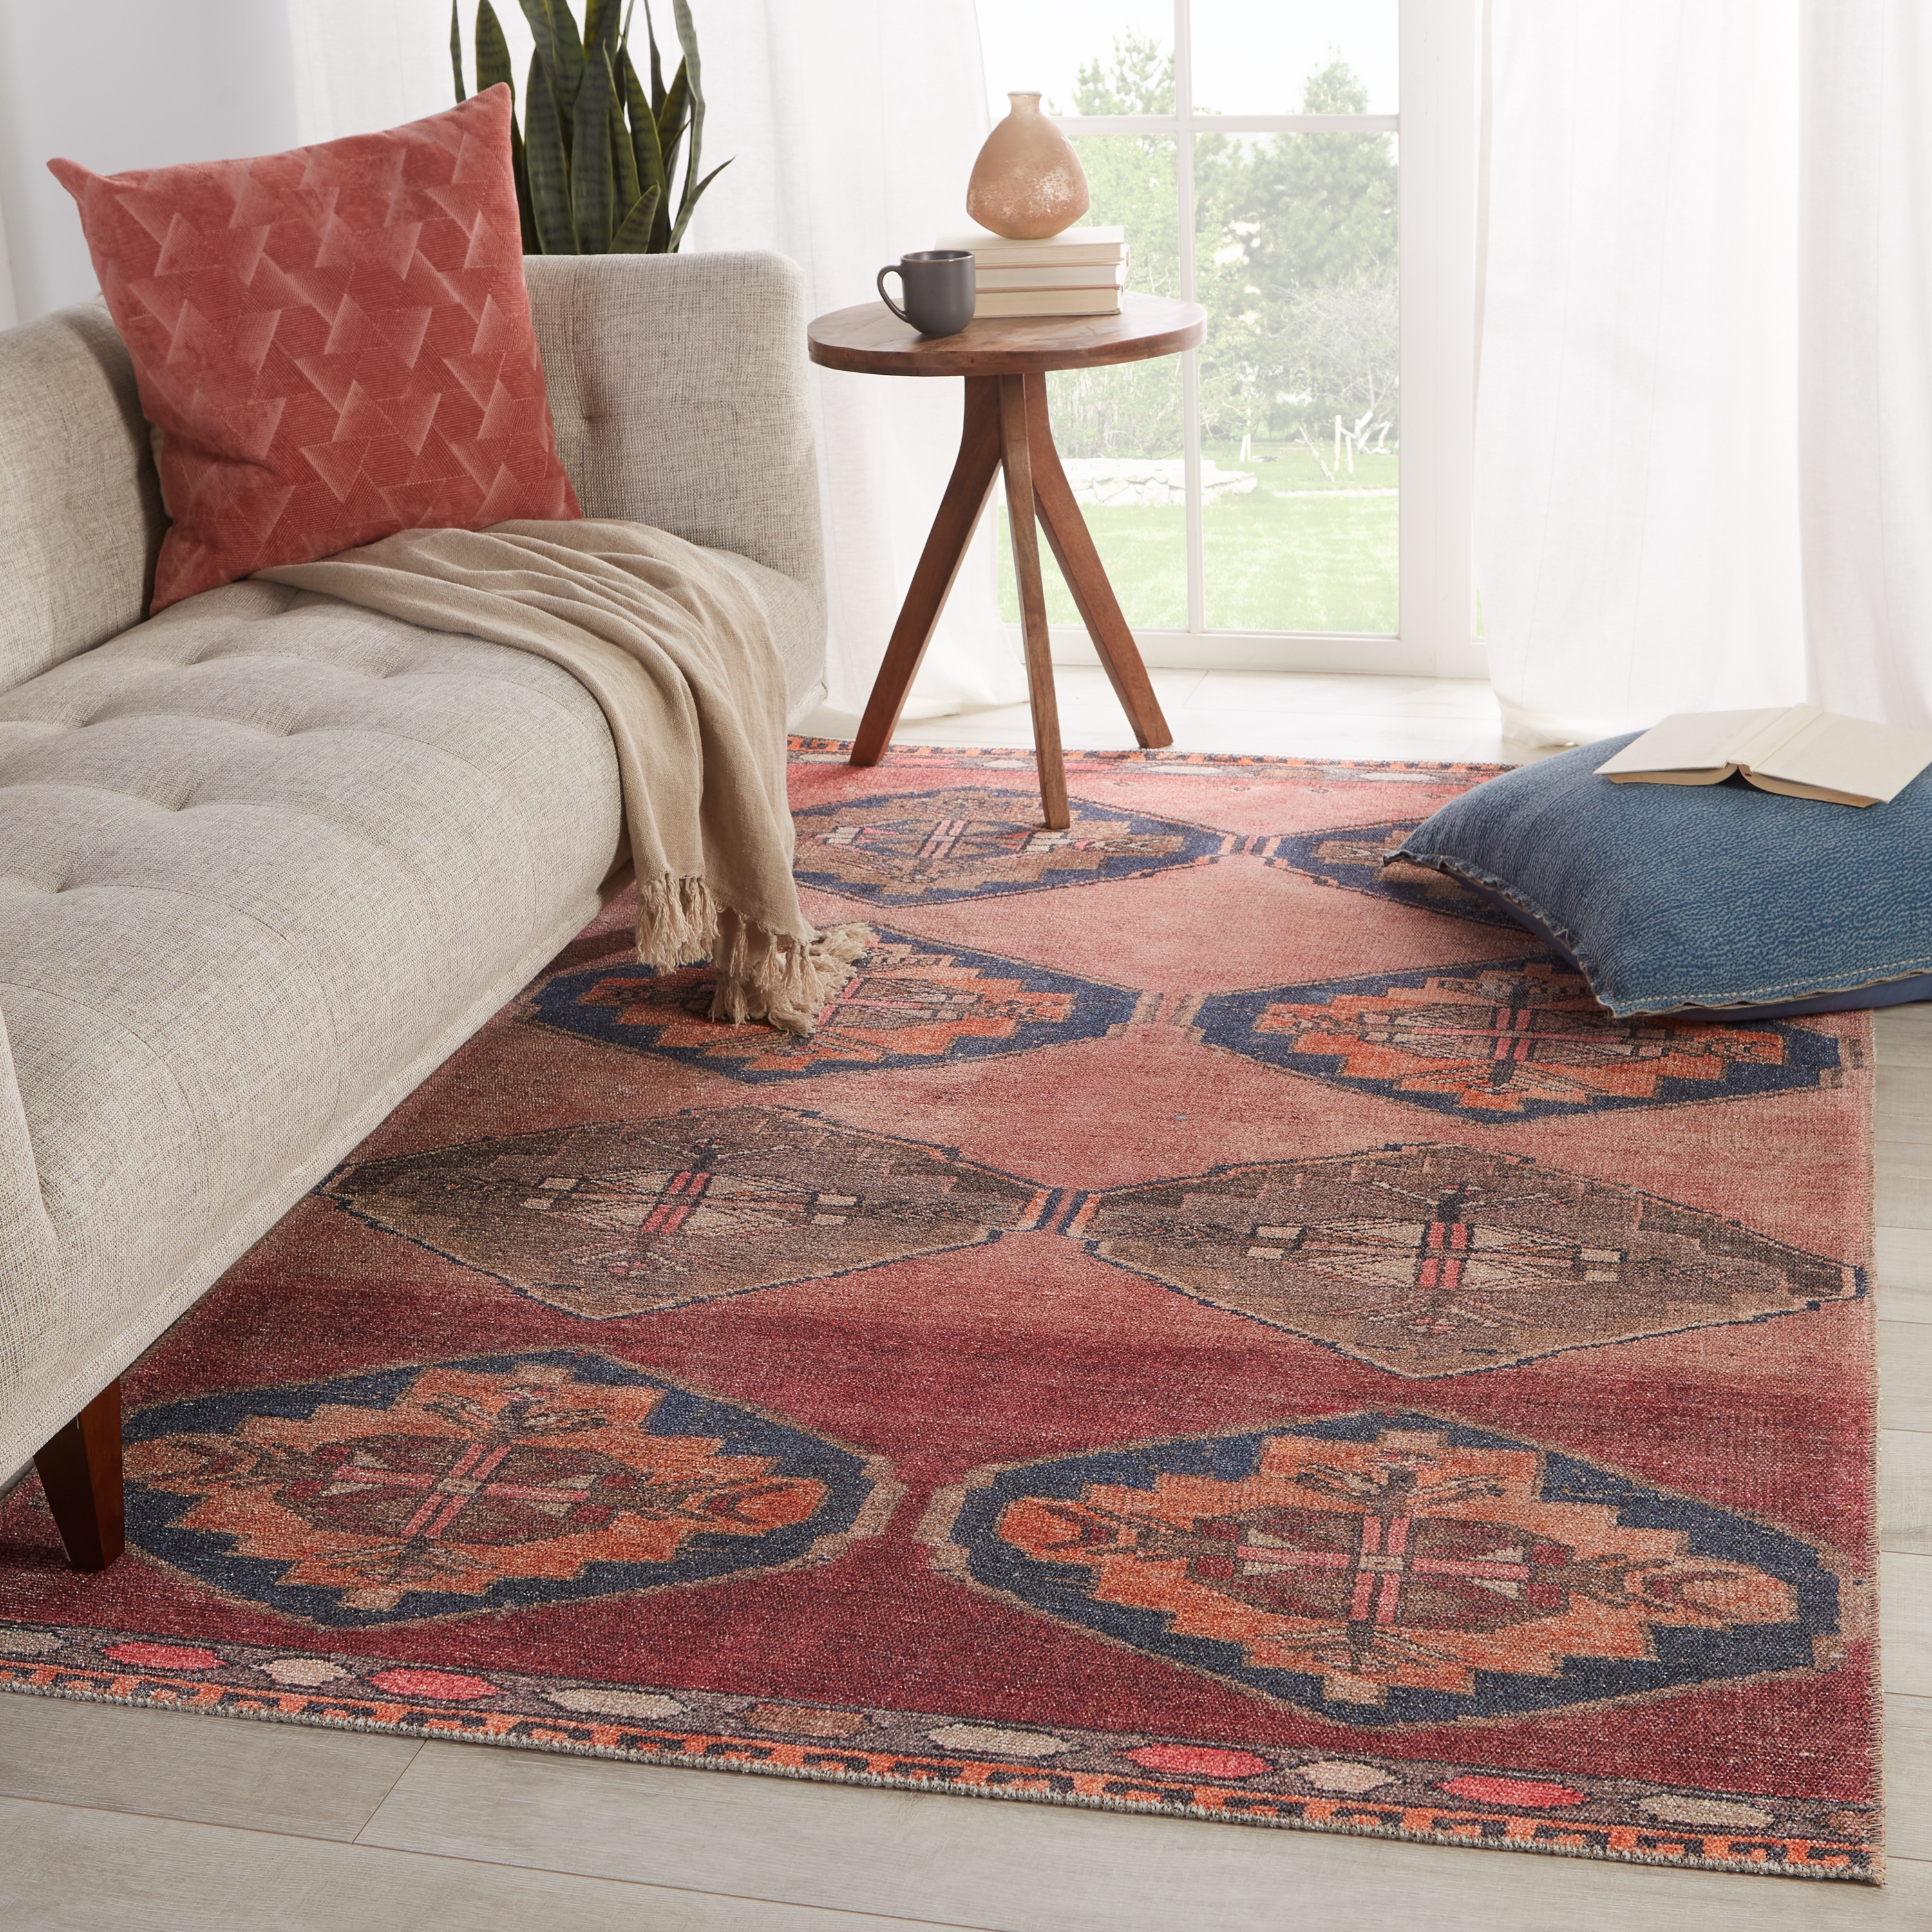 Vibe by Mirta Medallion Pink/ Blue Area Rug (9'X12') - Image 4